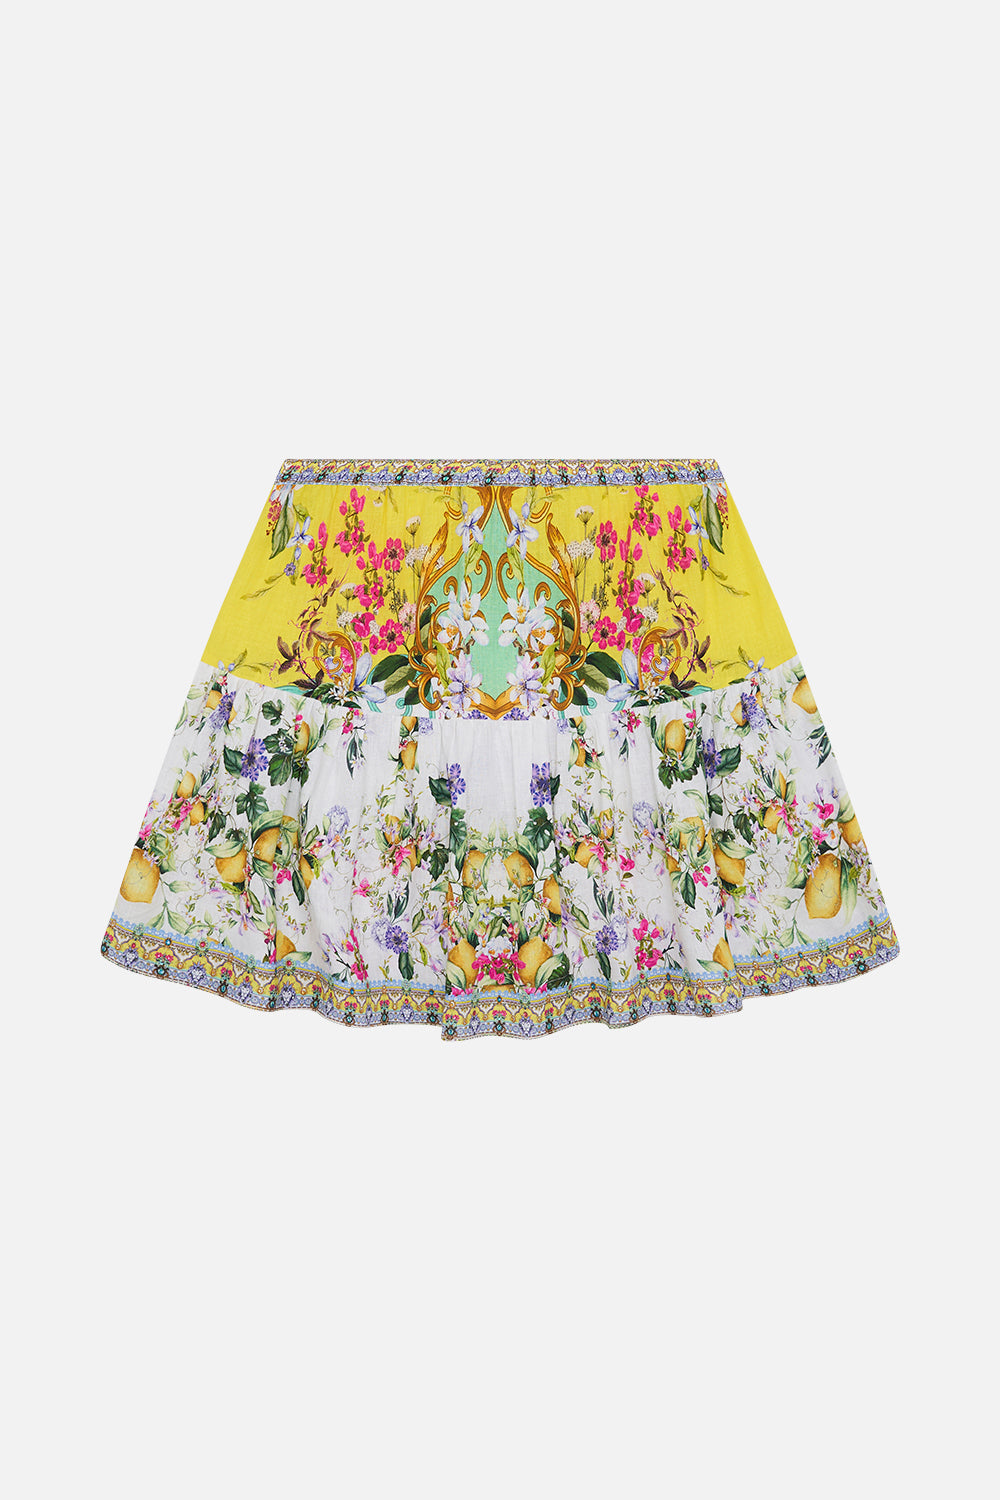 Product view of MILLA BY CAMILLA kids floral mini skirt in Caterina Spritz print